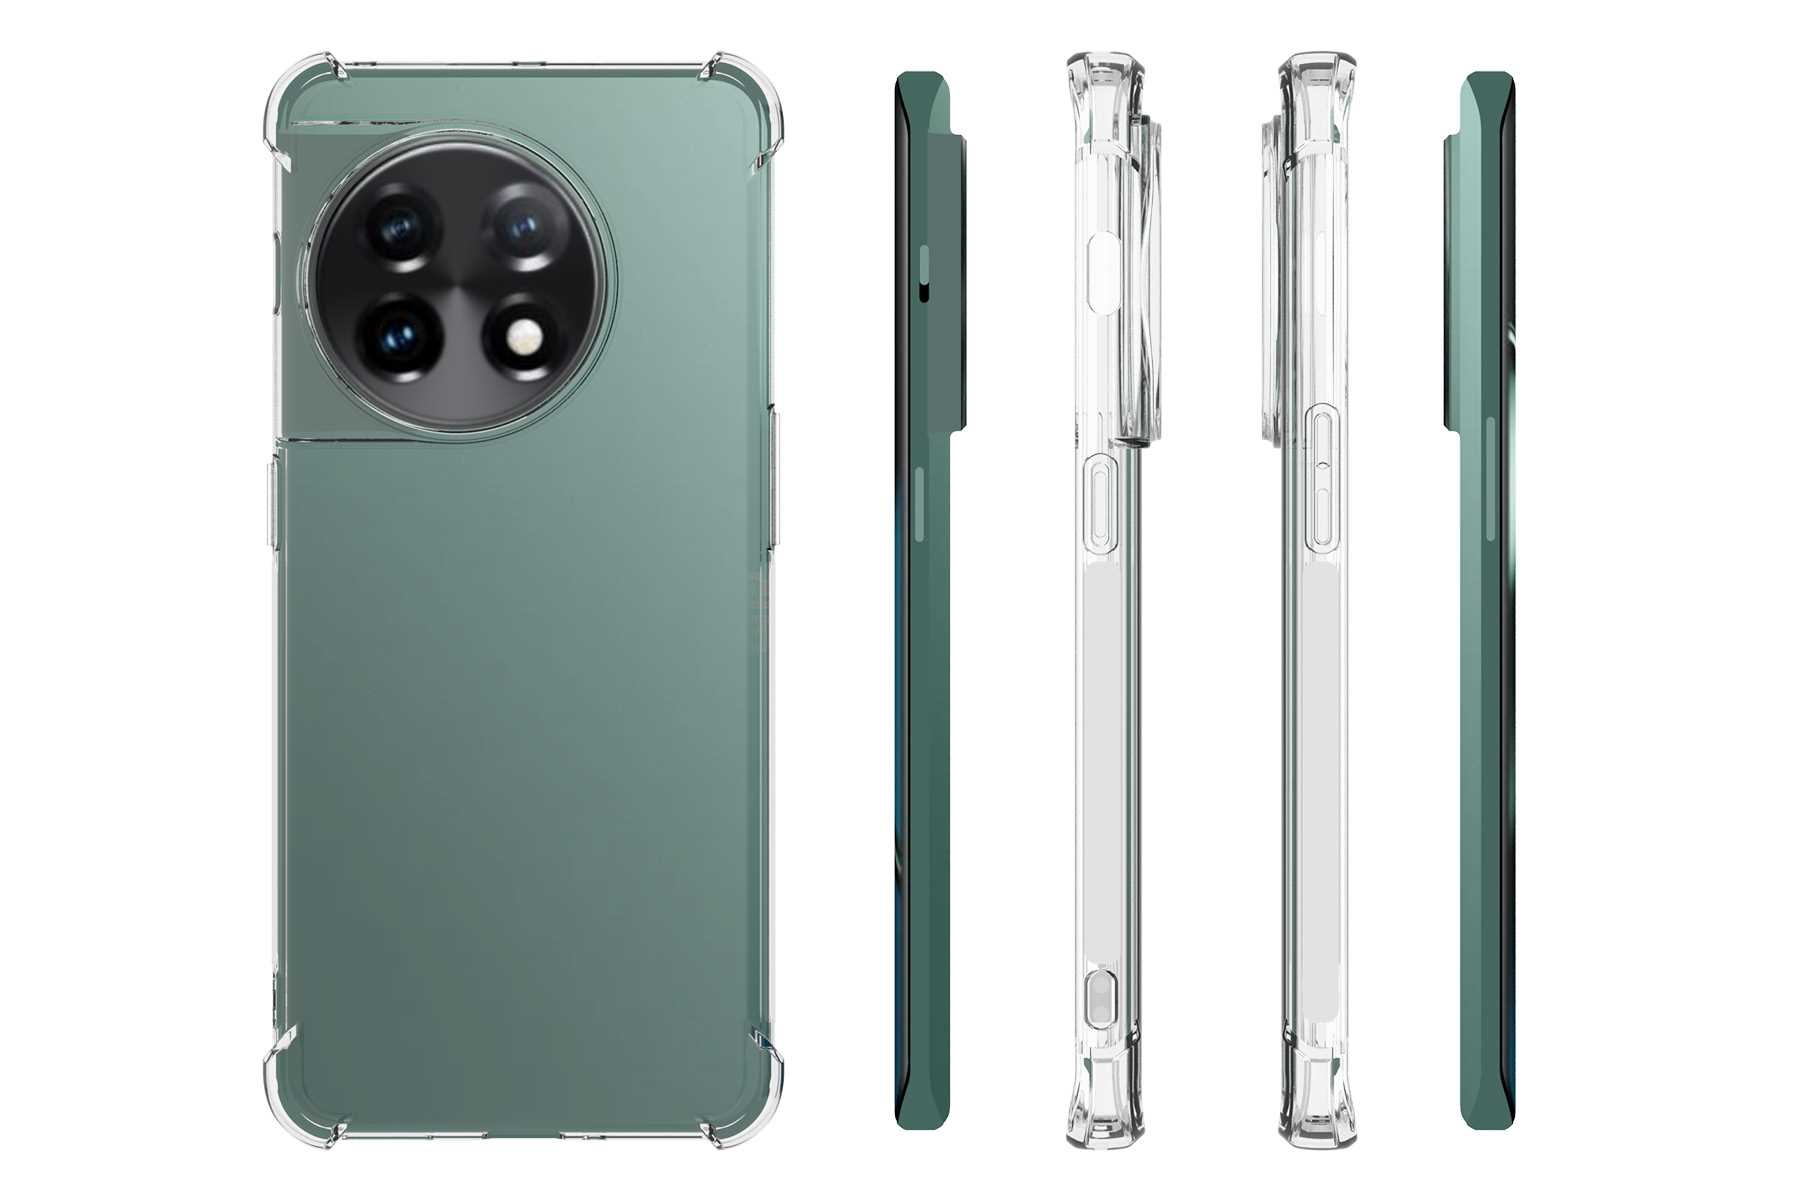 MTB MORE ENERGY Case, 11, Transparent Clear Backcover, OnePlus, Armor